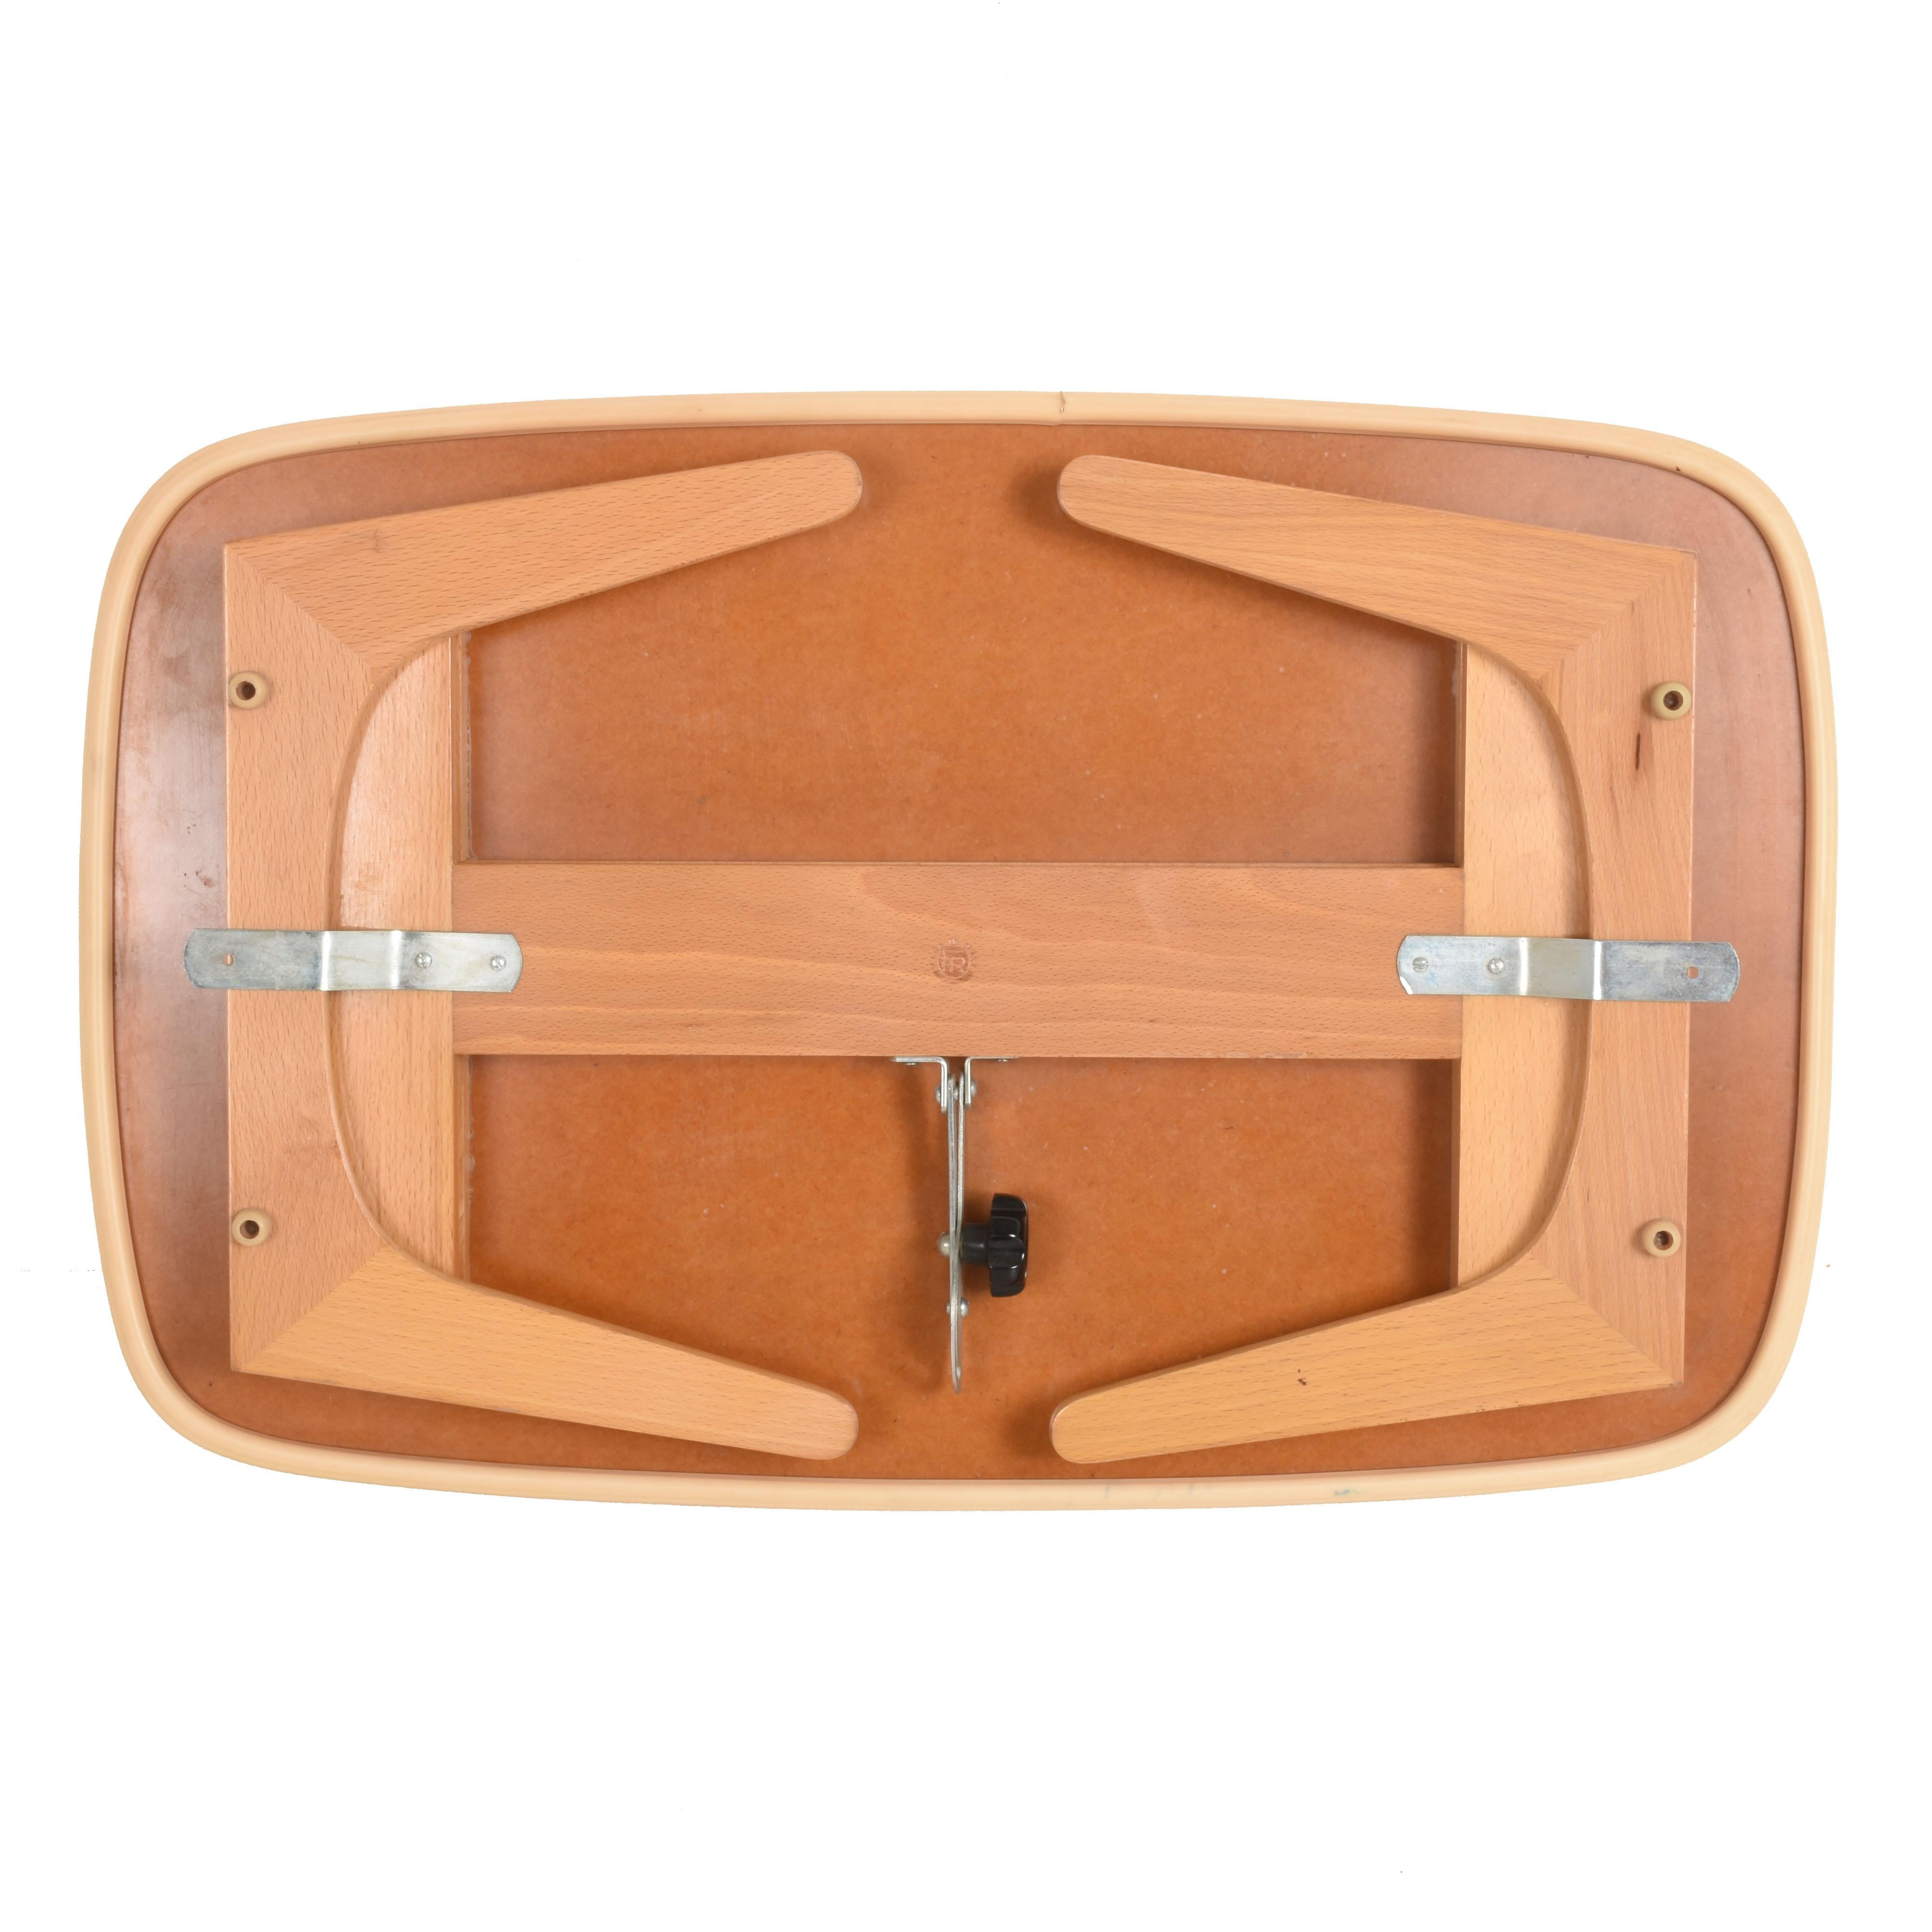 20th Century Folding and Adjustable Bed Tray, Laminated Wood, Fratelli Reguitti, Italy, 1950s For Sale